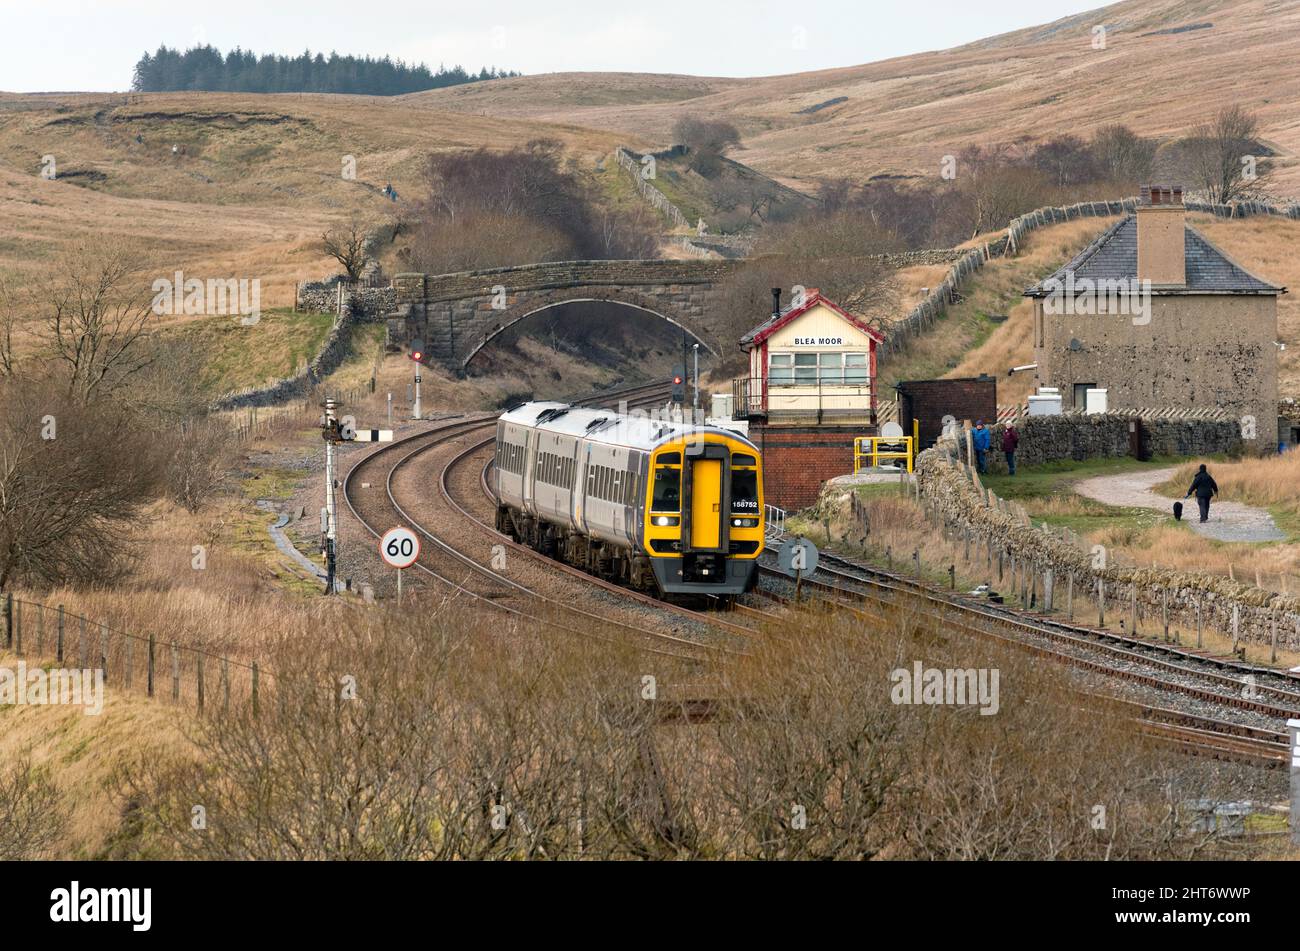 A Sprinter passenger train passes the remote Blea Moor signal box en-route to Leeds from Carlisle, on the famous Settle-Carlisle railway. Stock Photo